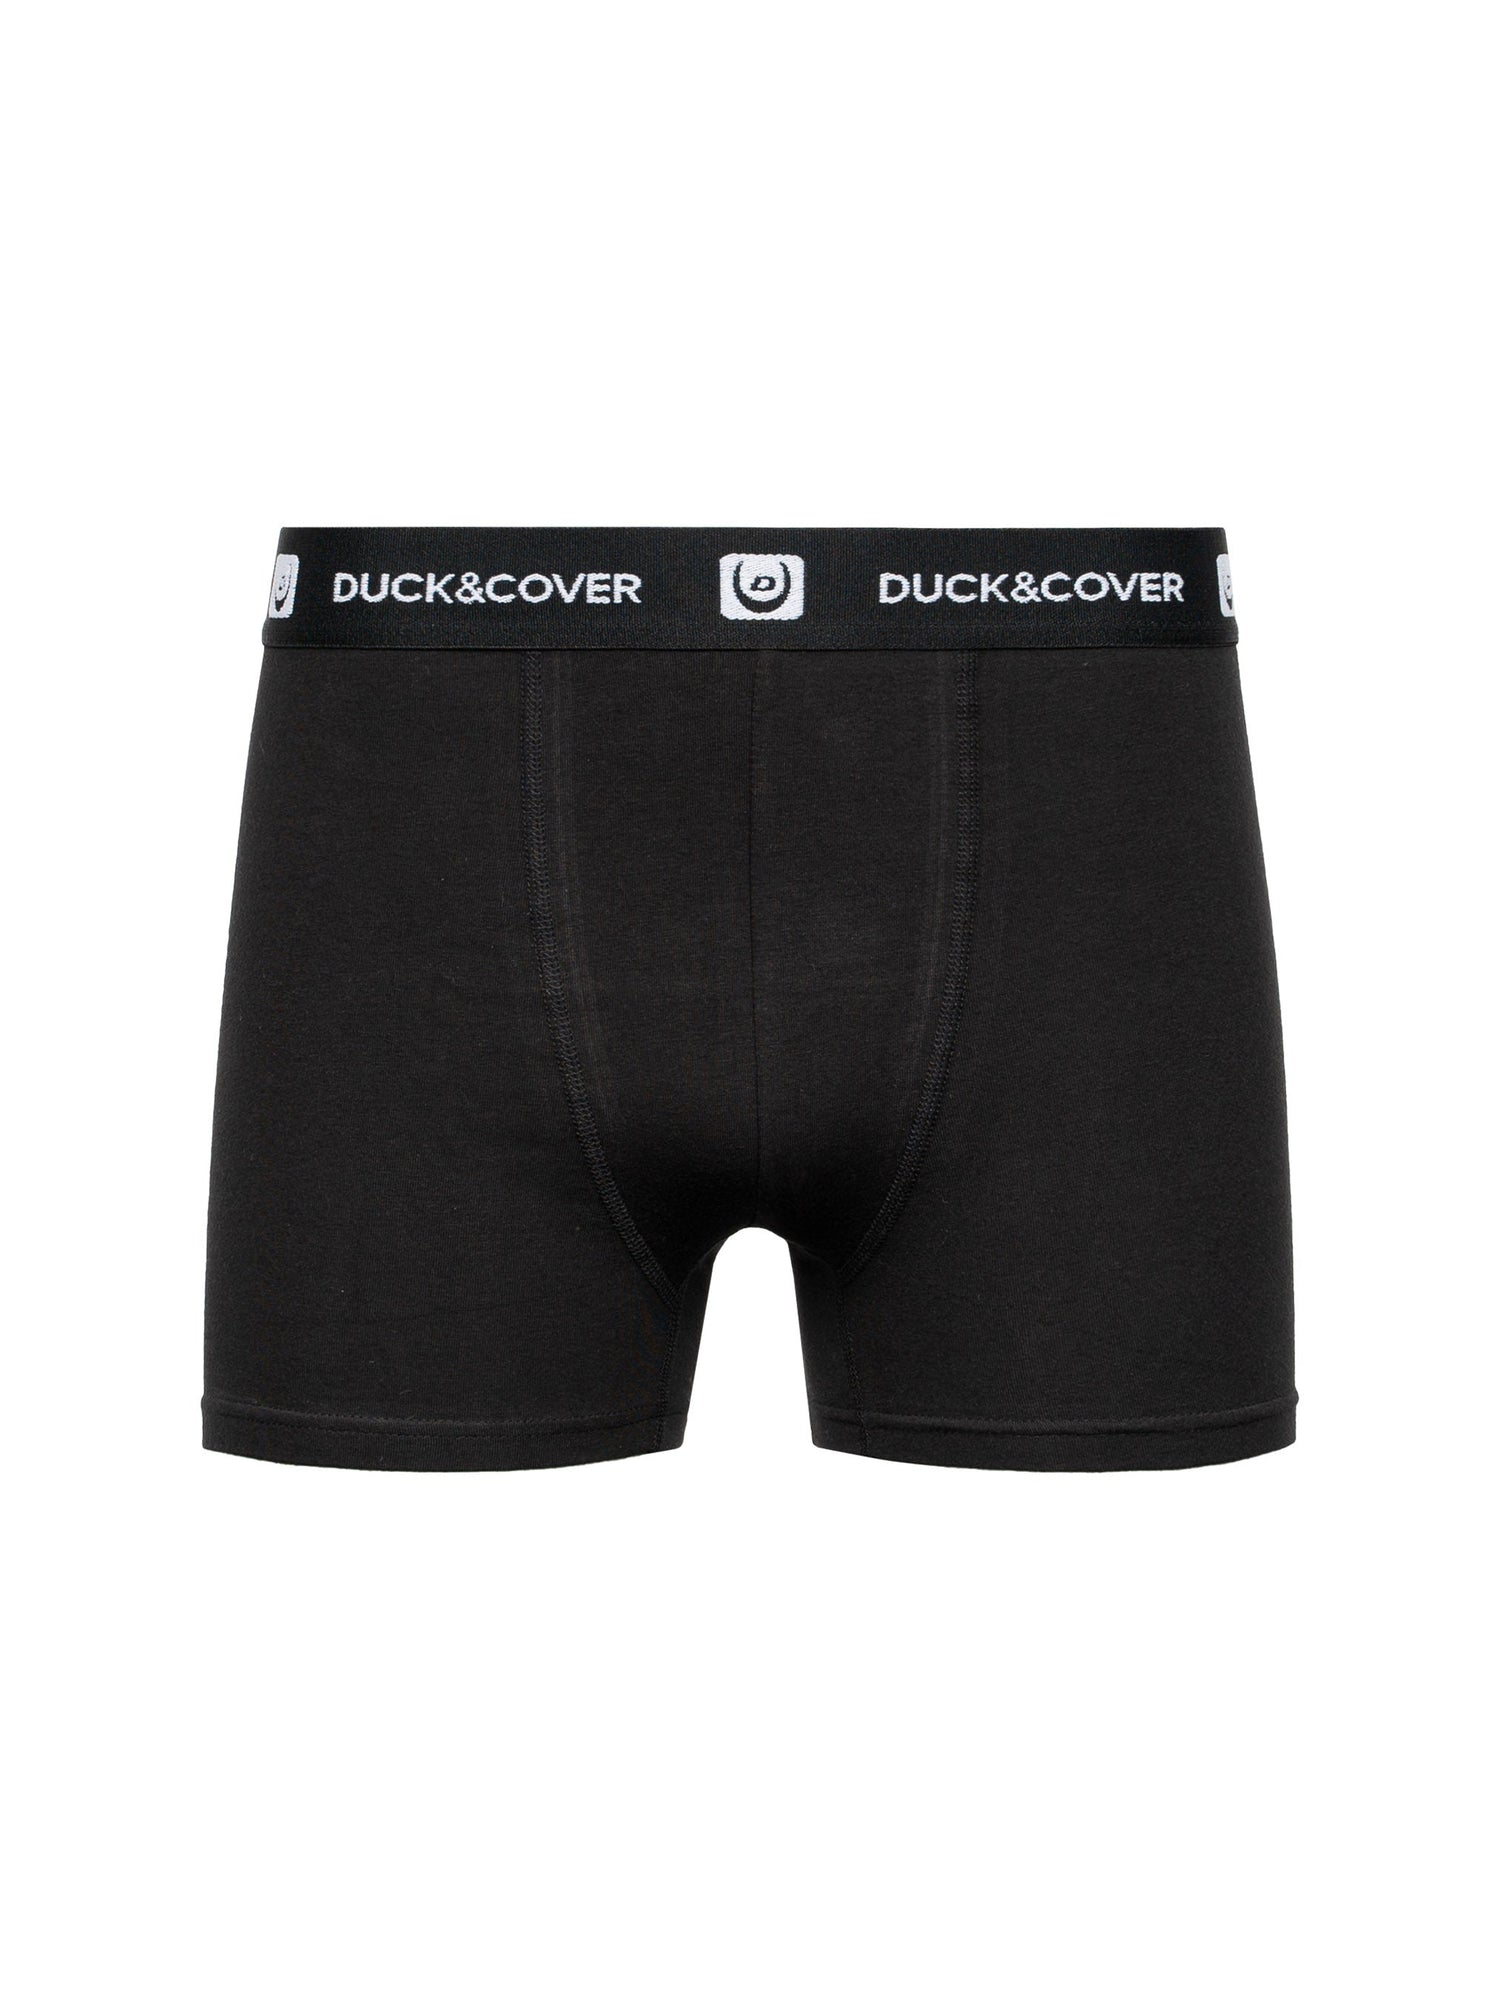 Mens Keach Boxers 3pk Assorted – Duck and Cover